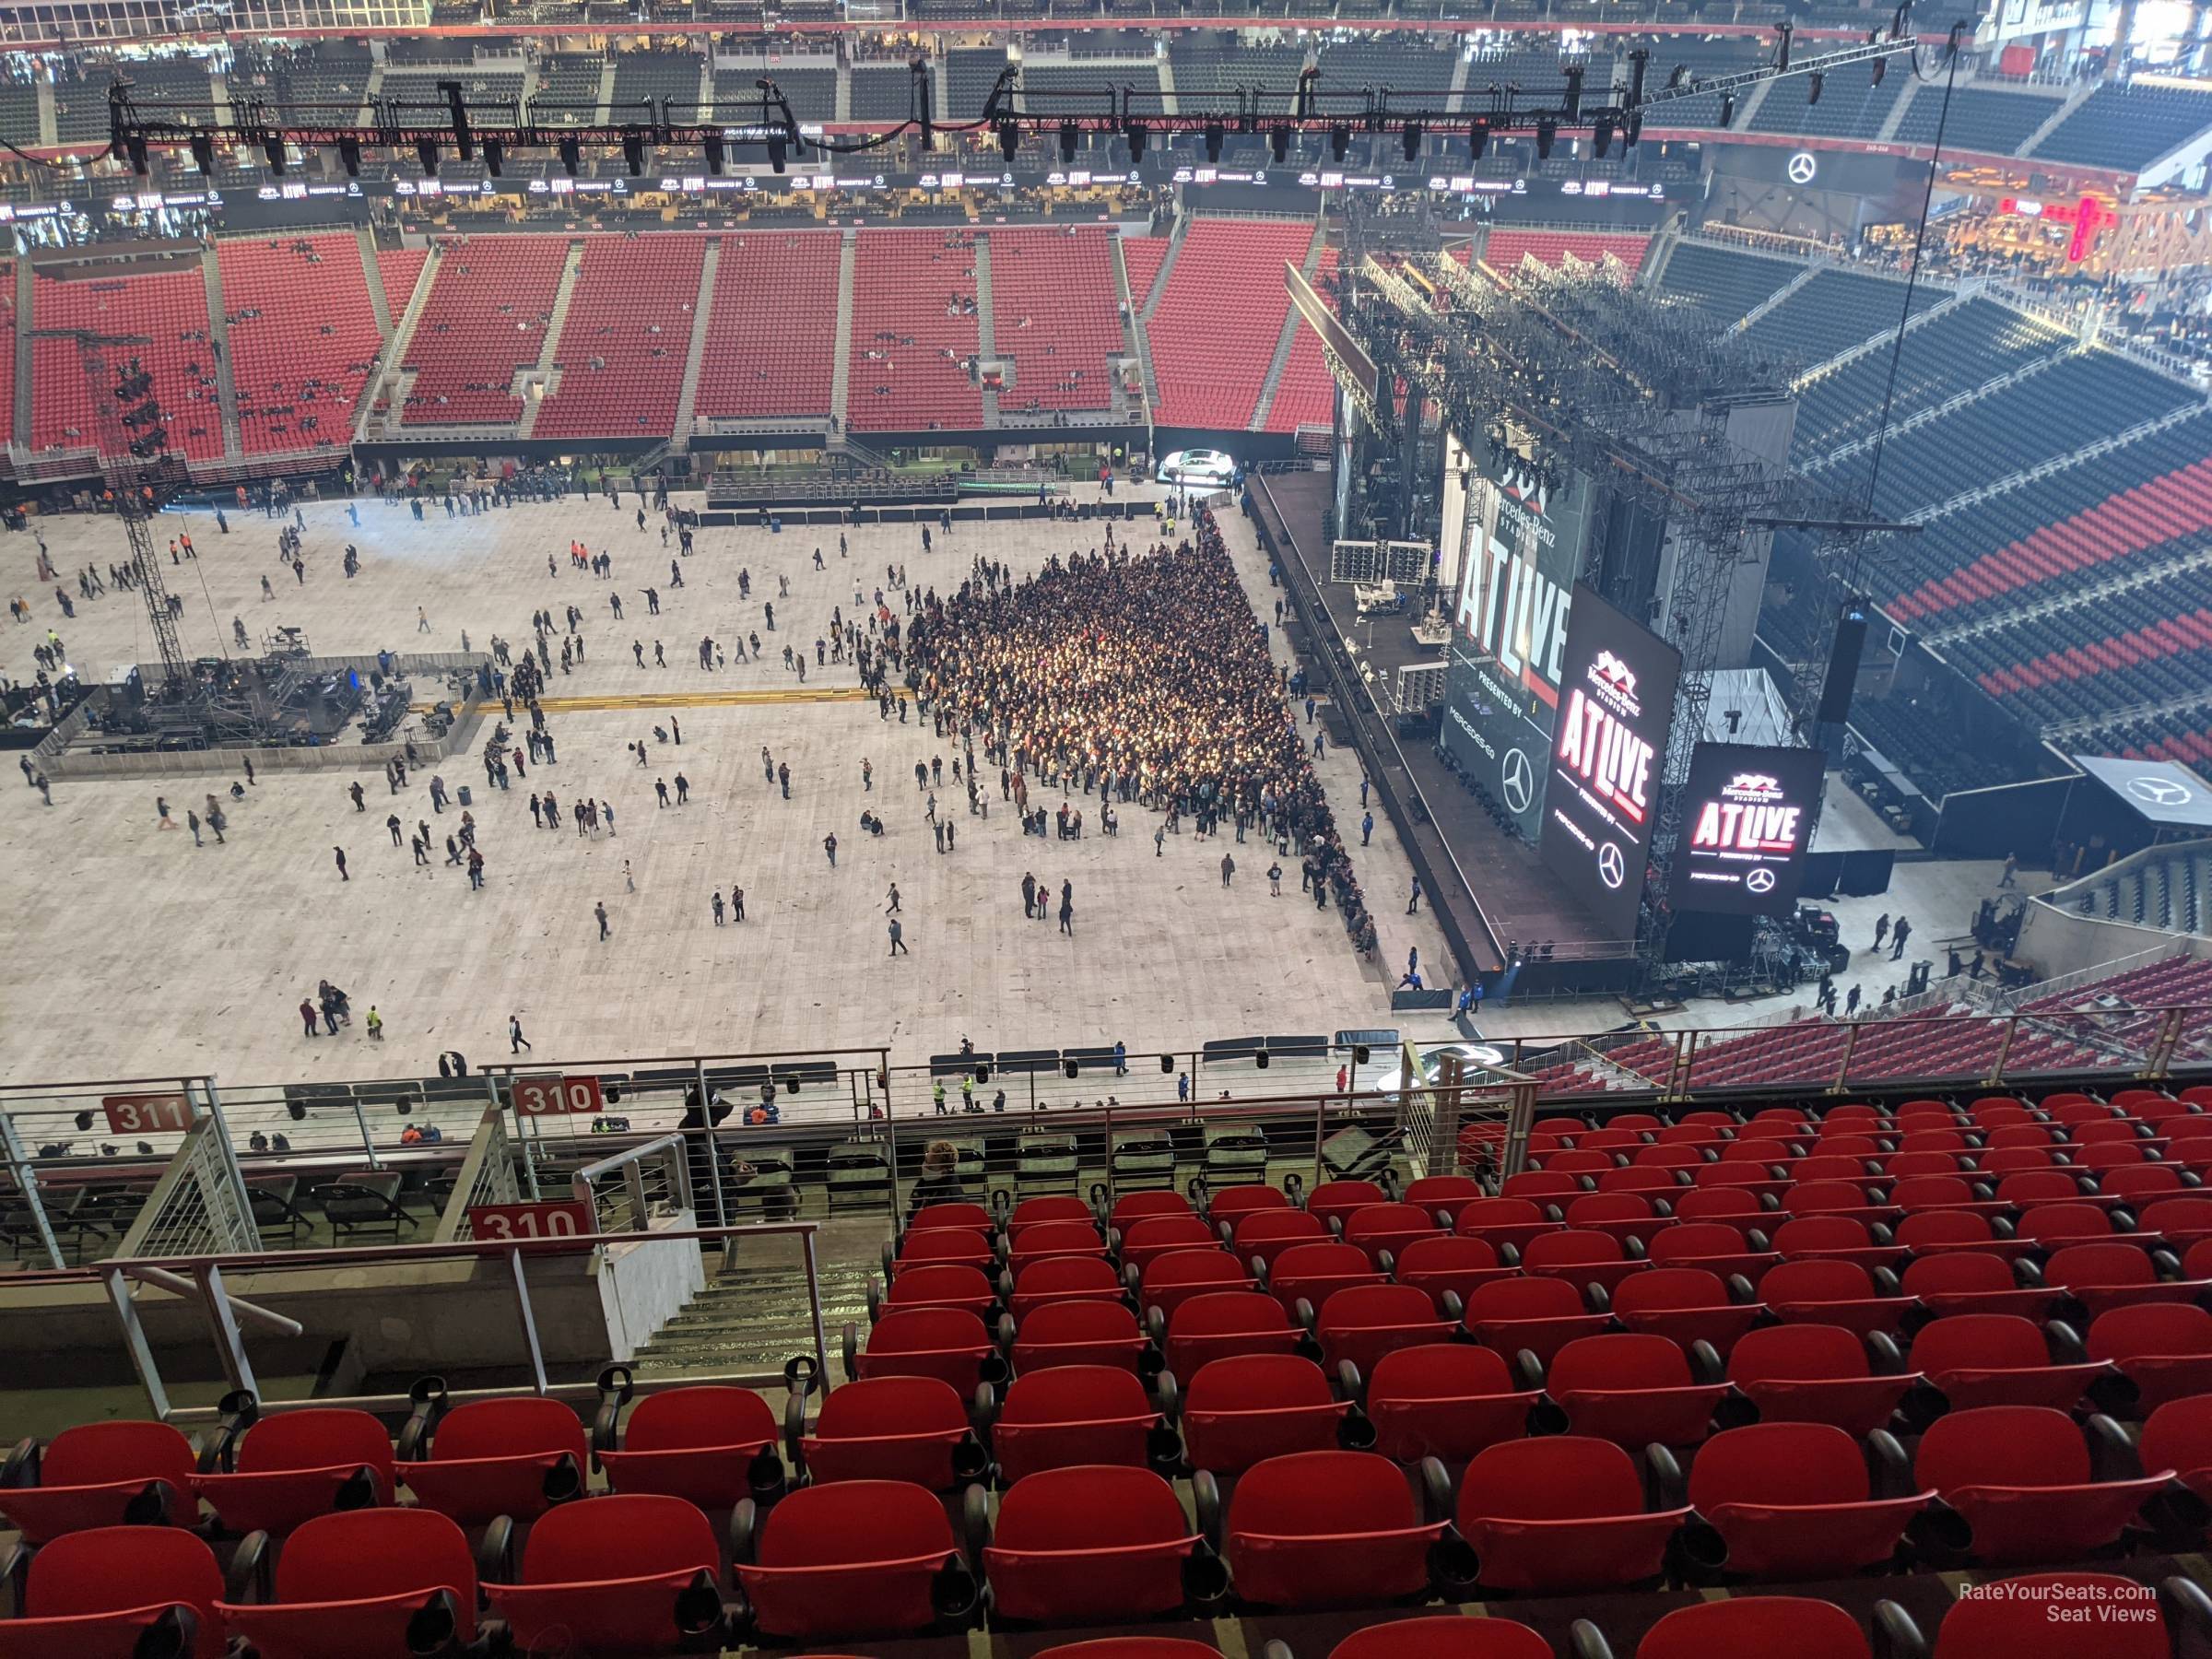 section 310, row 13 seat view  for concert - mercedes-benz stadium